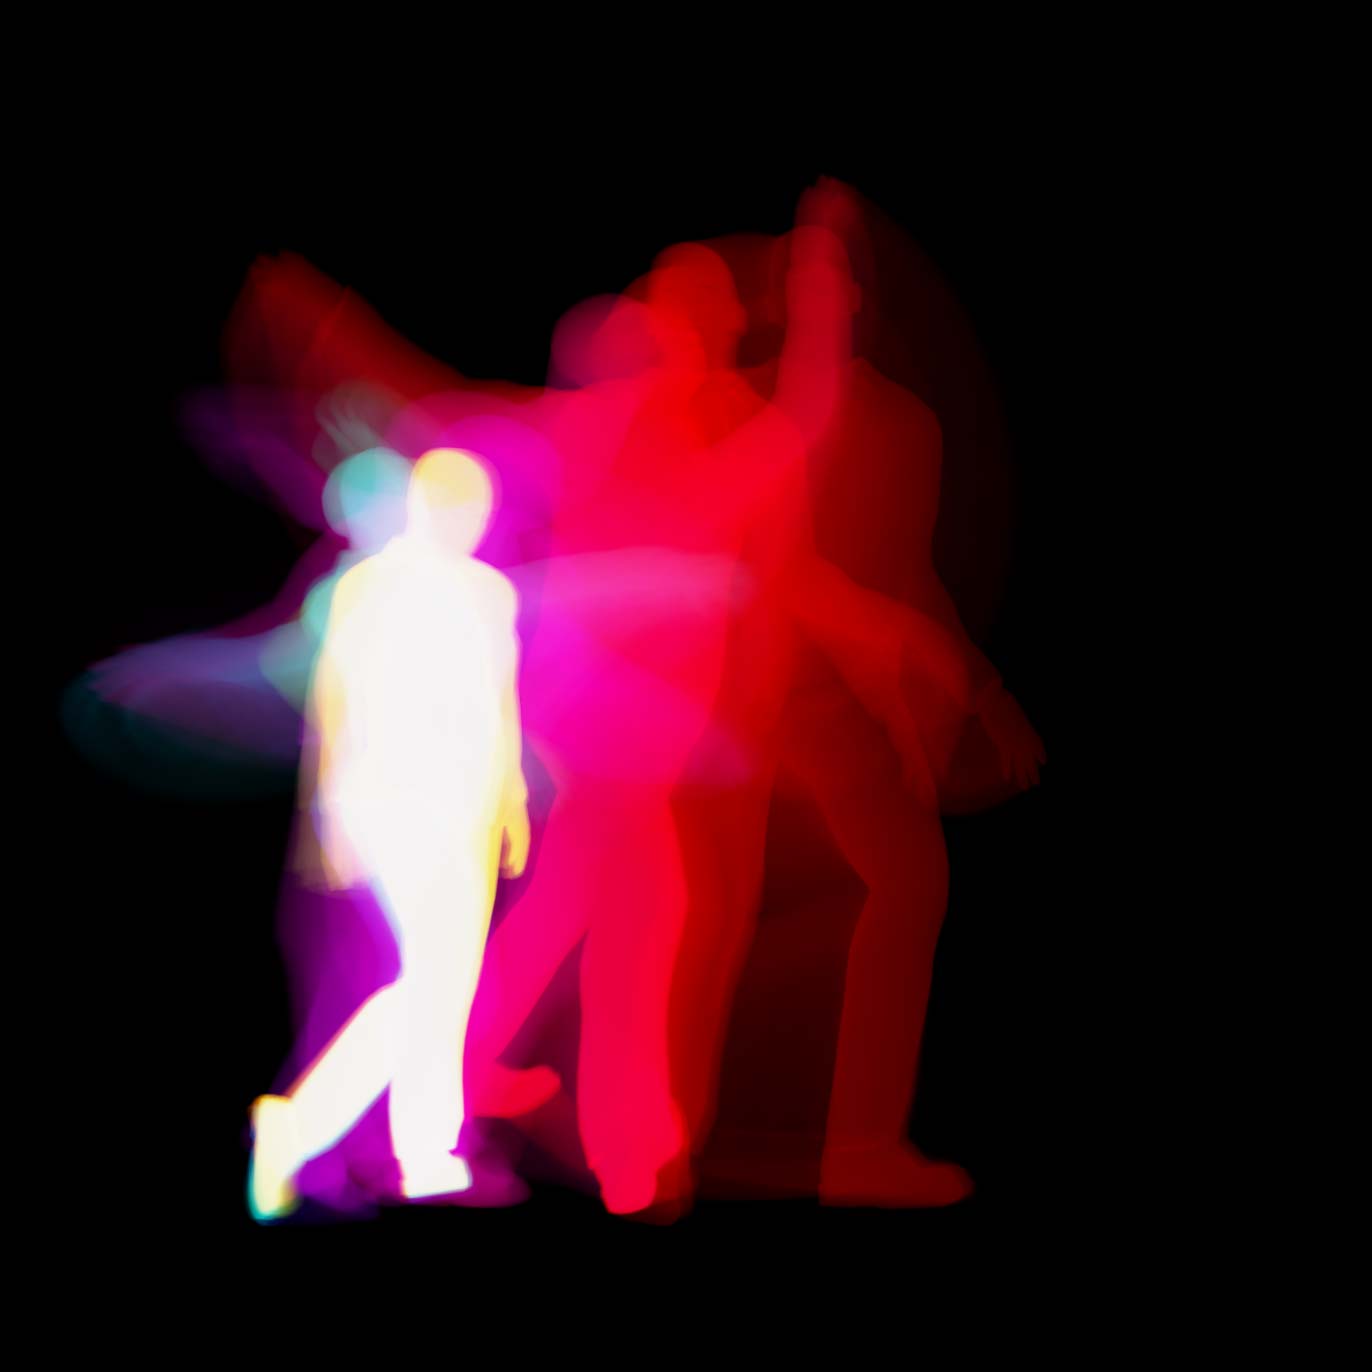 Playing with motion capture data.